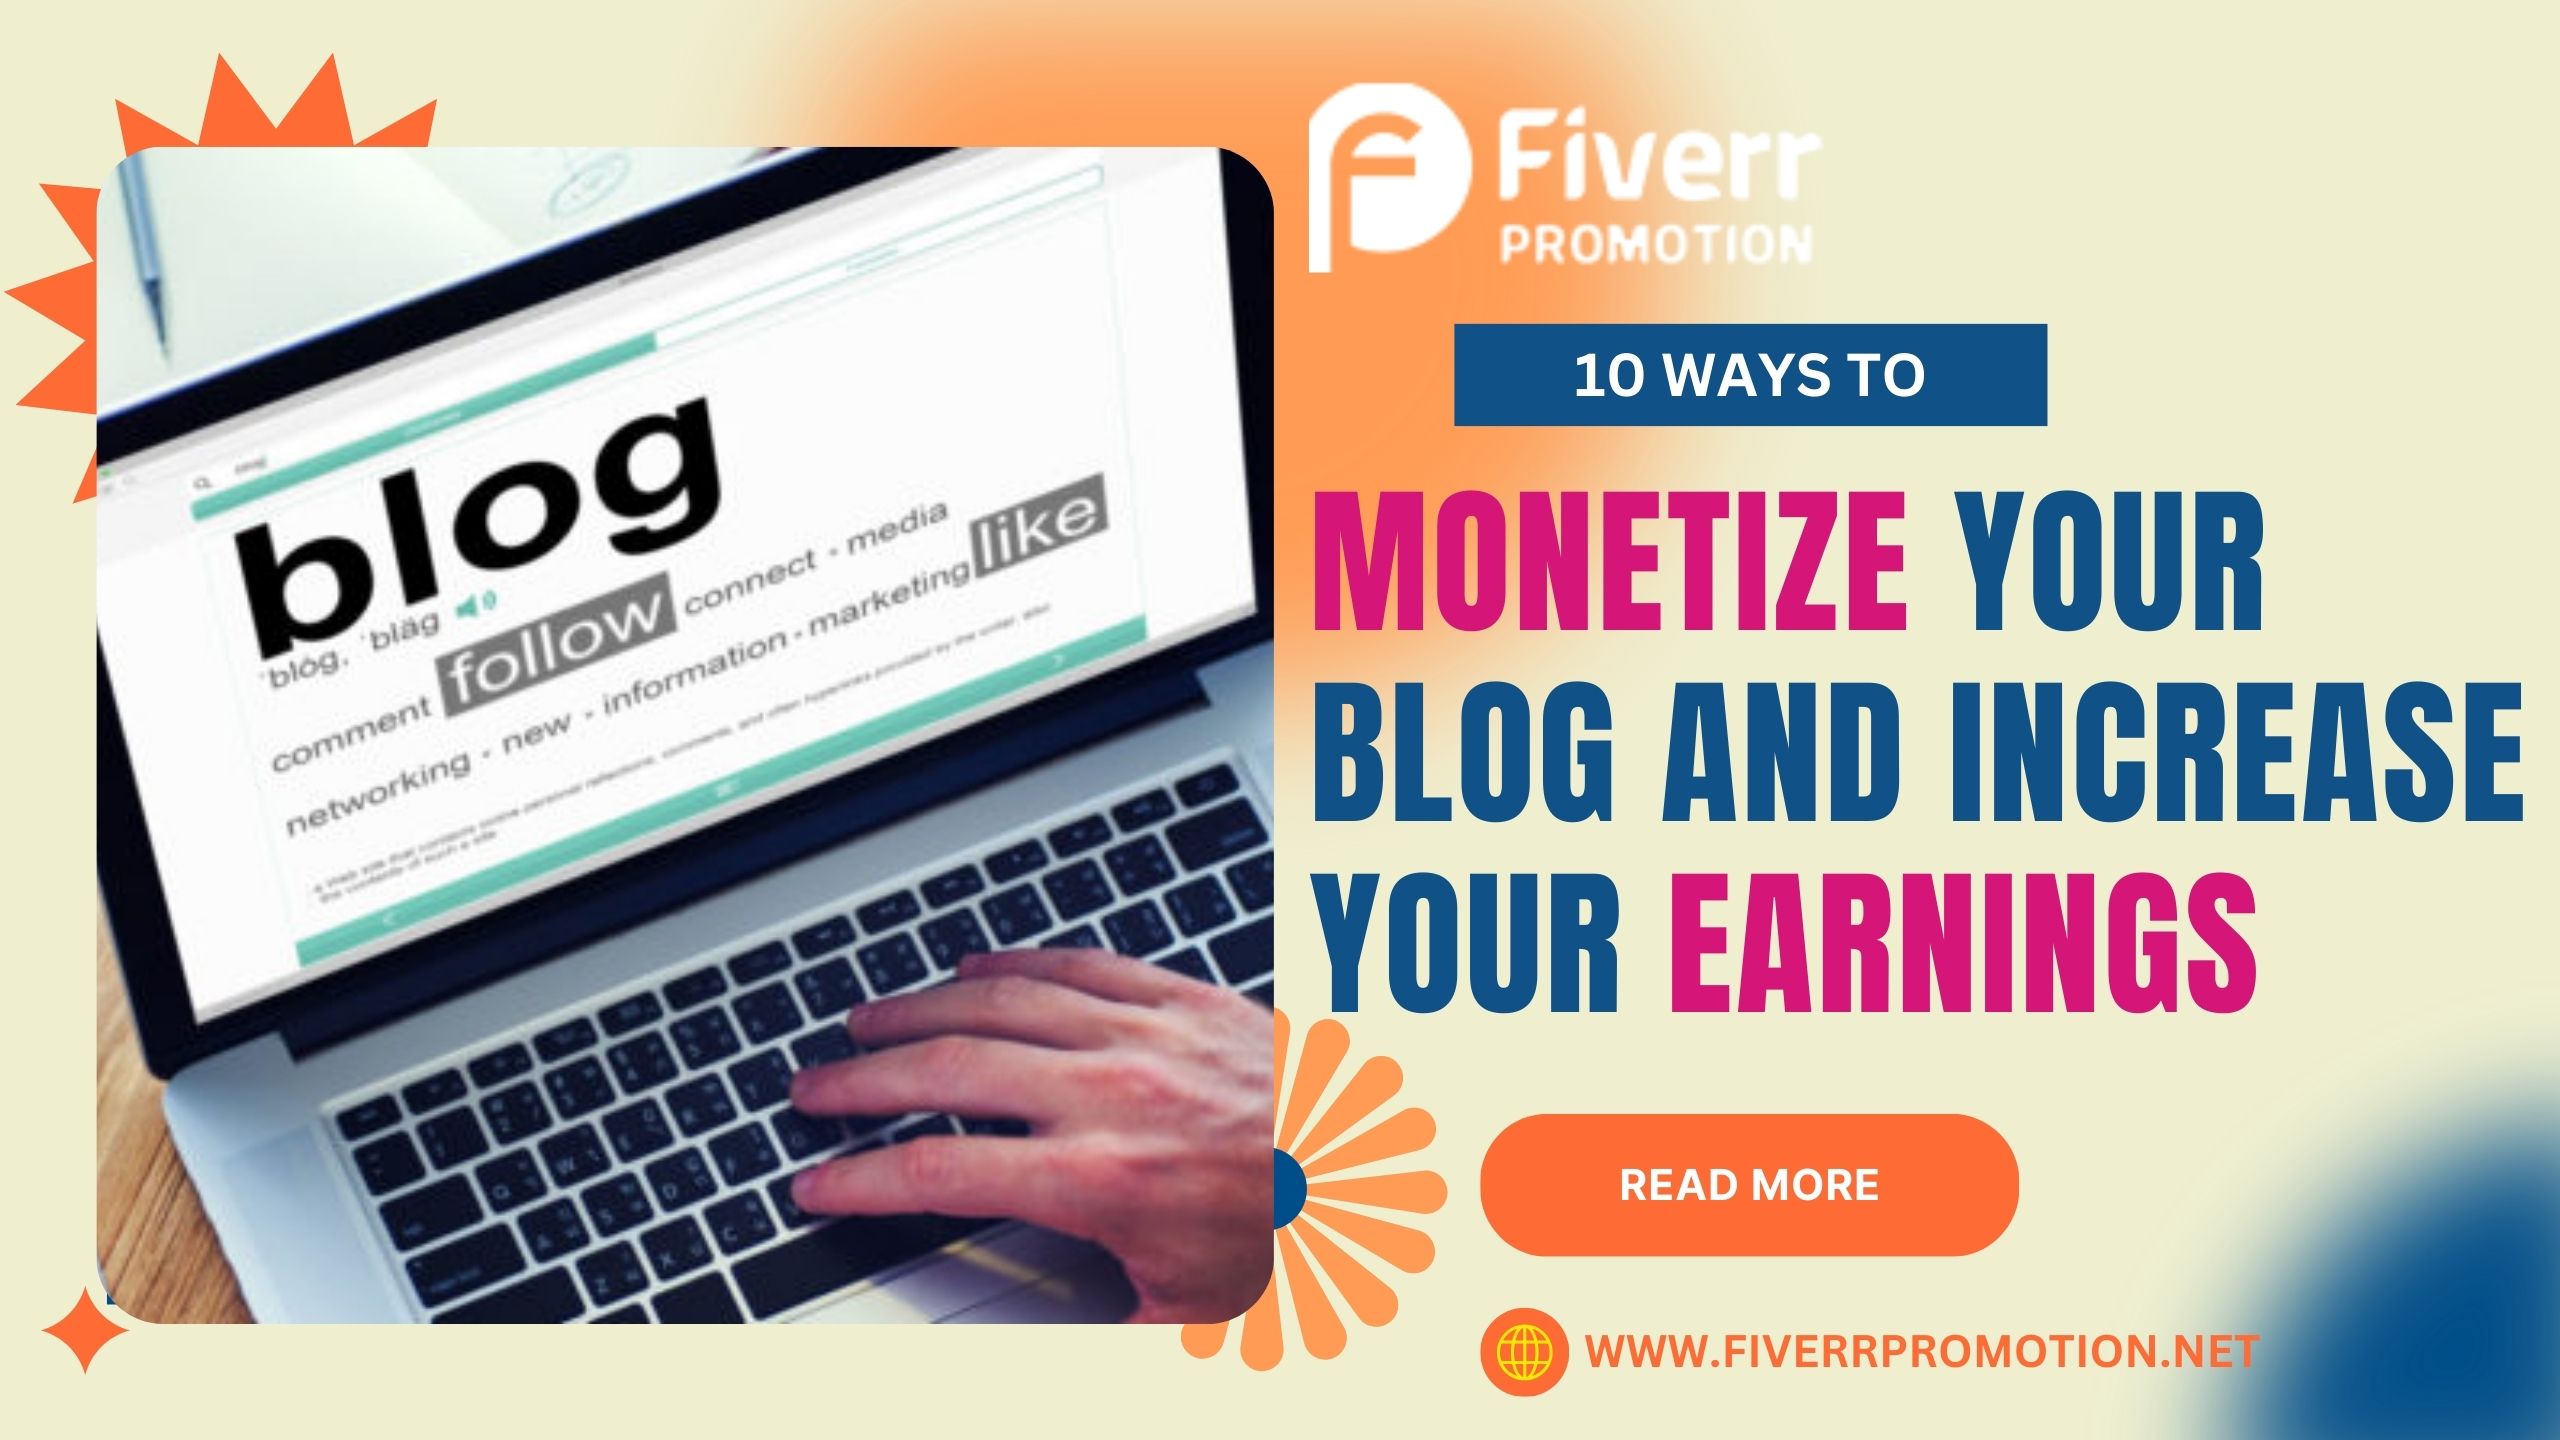 10 Ways to Monetize Your Blog and Increase Your Earnings